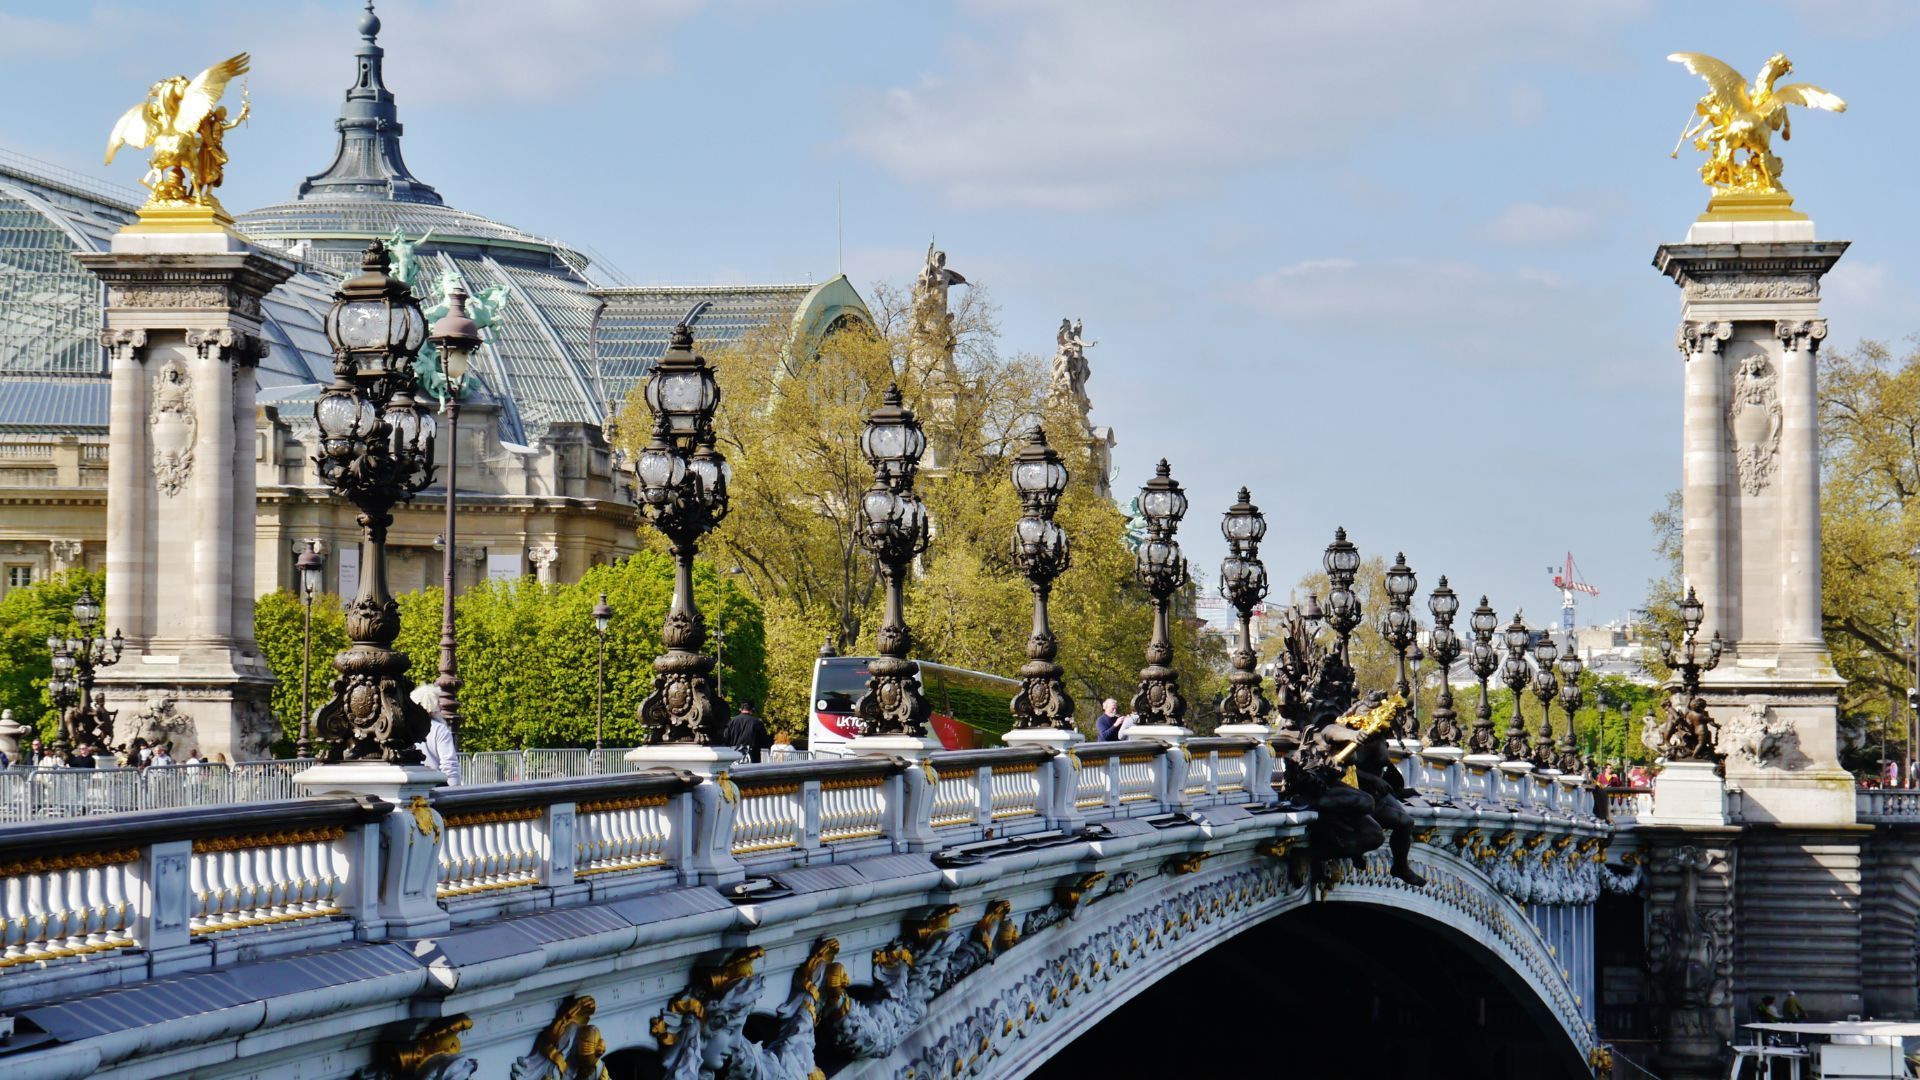 Emily in Paris filming locations to bookmark for your next Paris trip